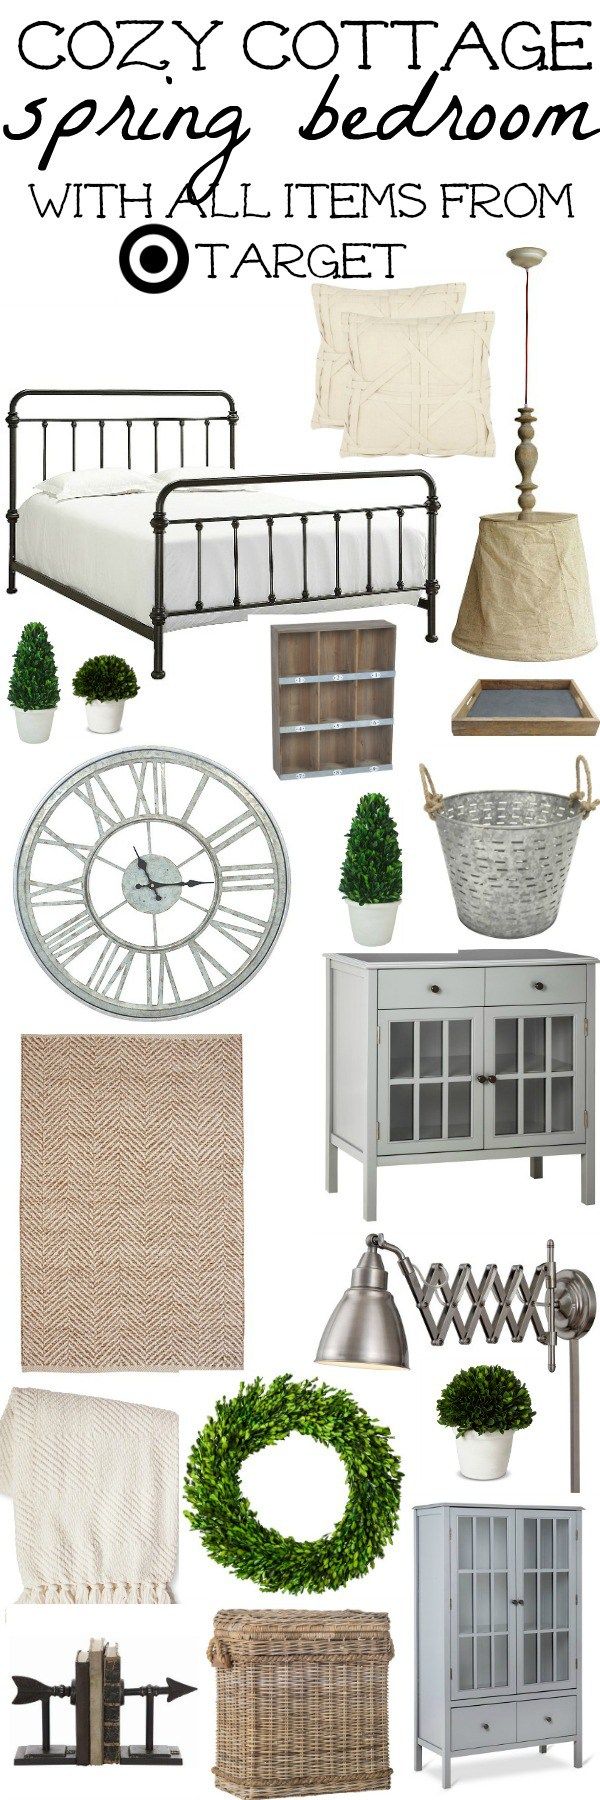 Cozy cottage spring bedroom design - With all items from Target! A must pin for ...